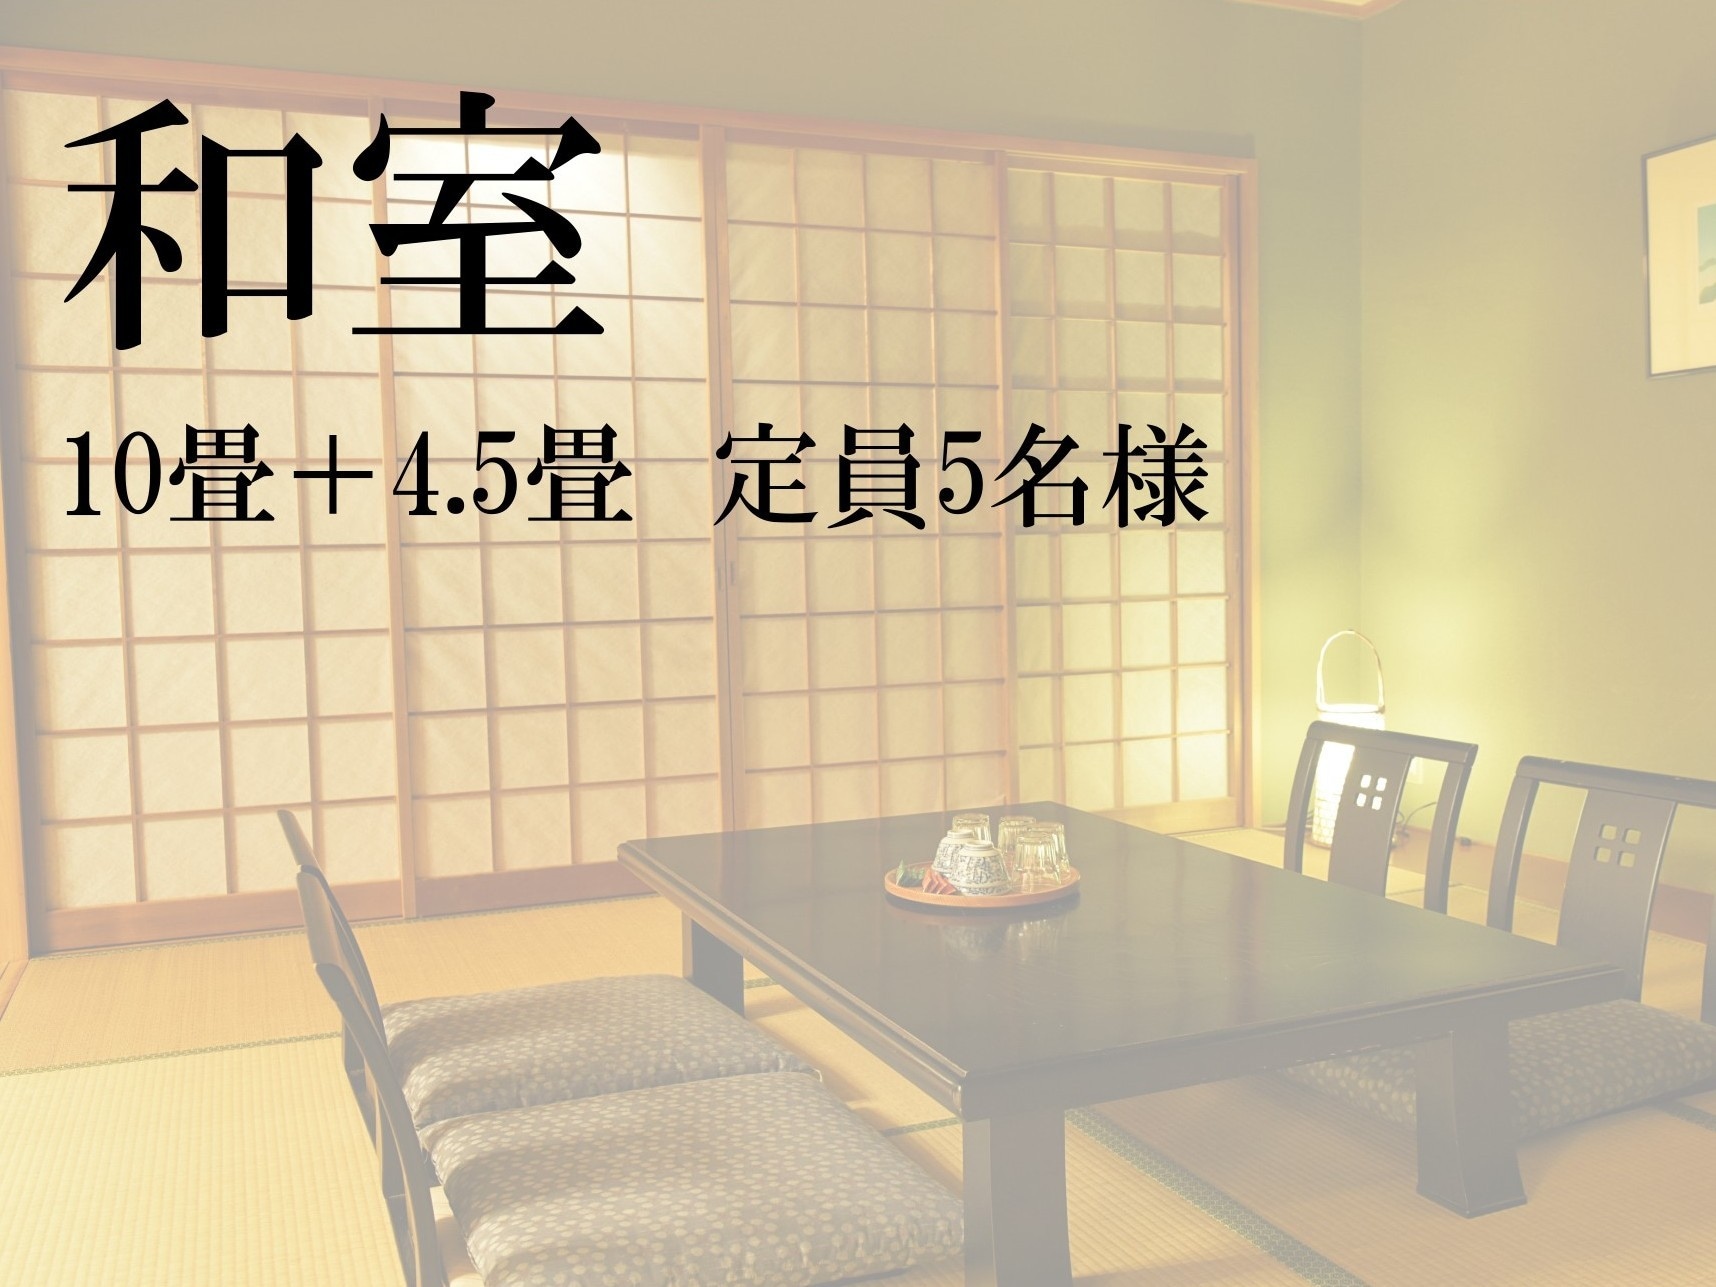 Japanese-style room title